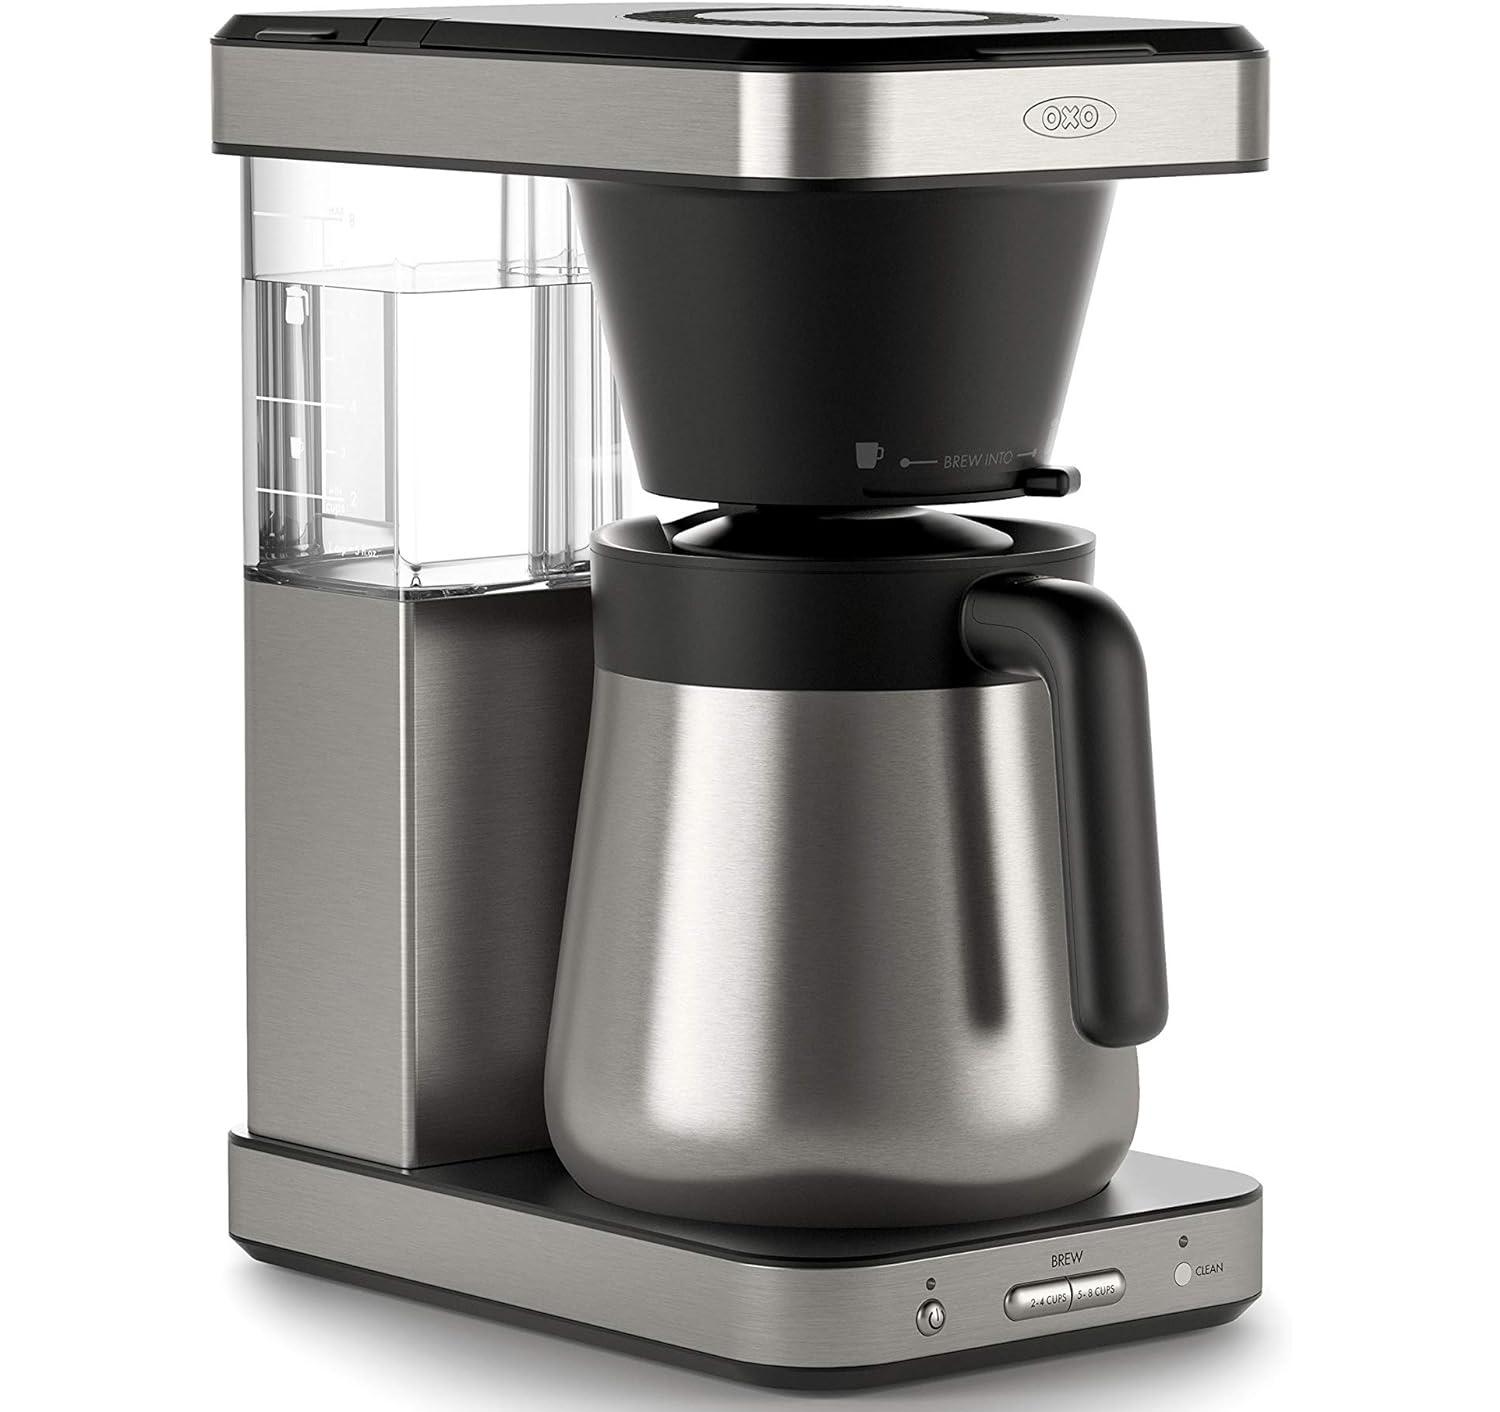 OXO Brew 8 Cup Coffee Maker for $135.99 Shipped